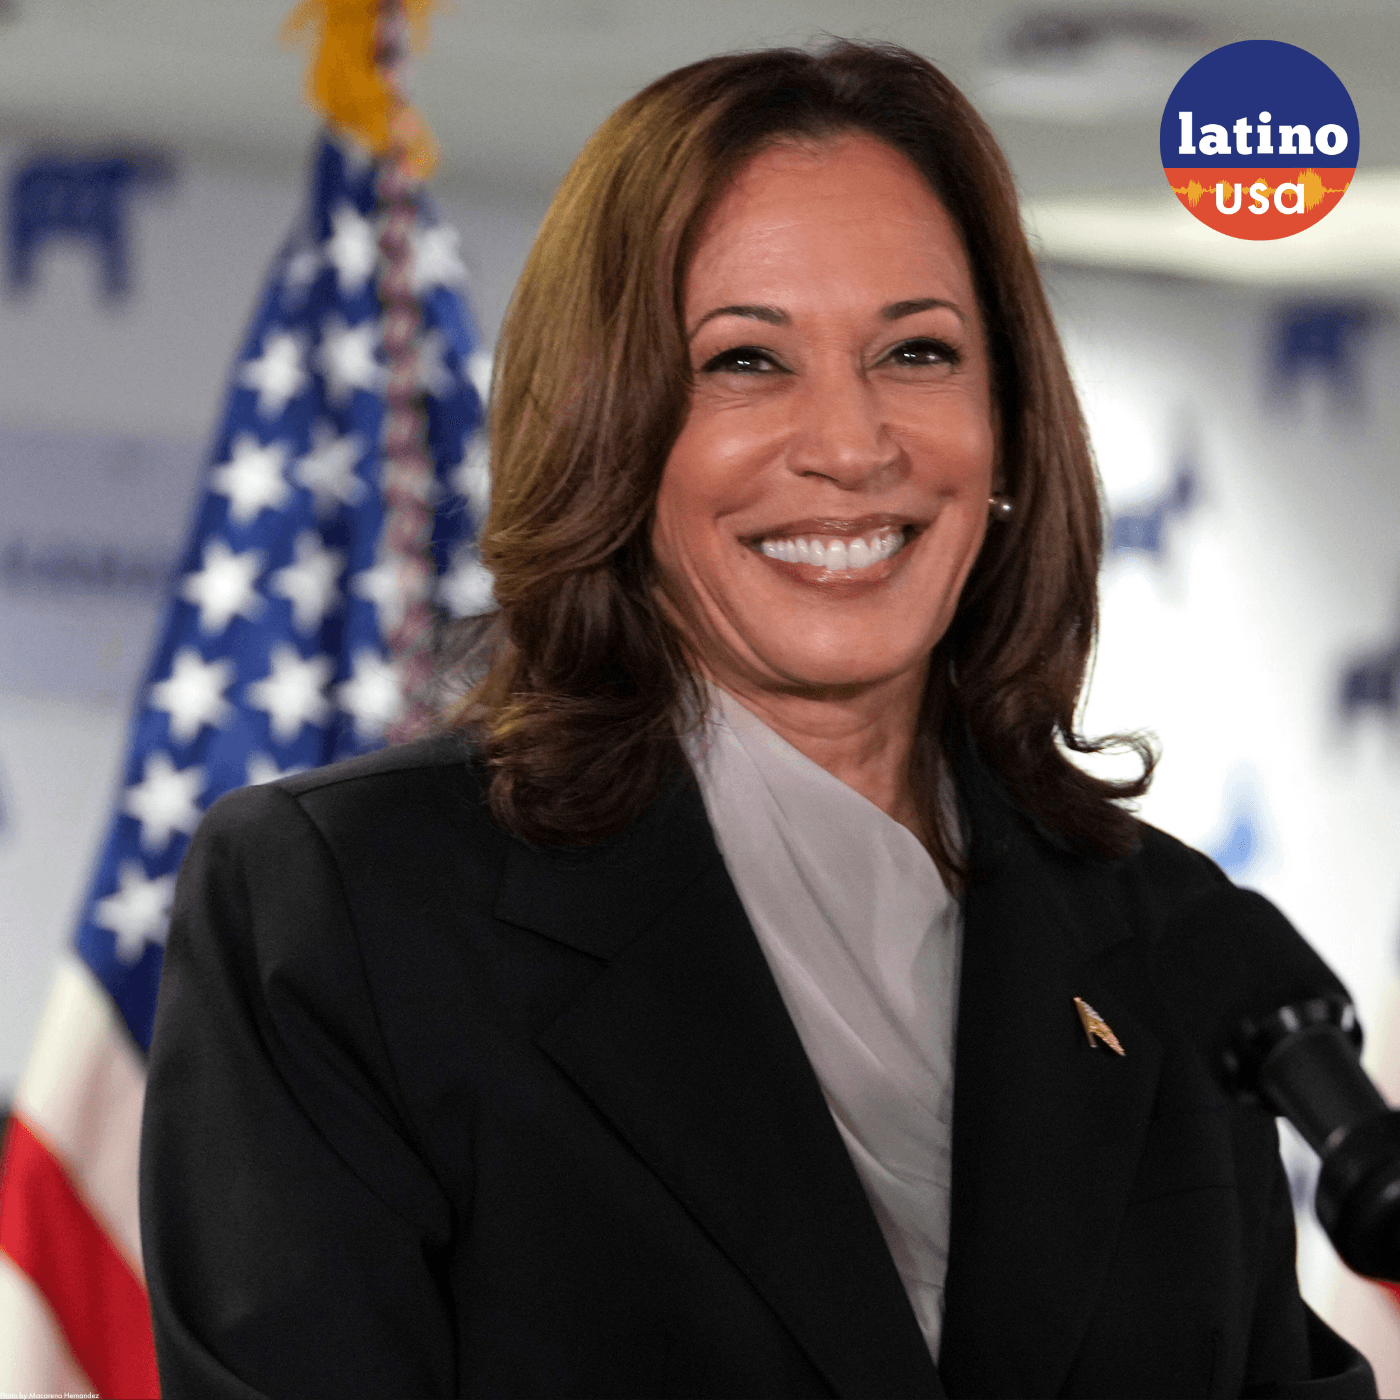 Thumbnail for "In Conversation With Kamala Harris".